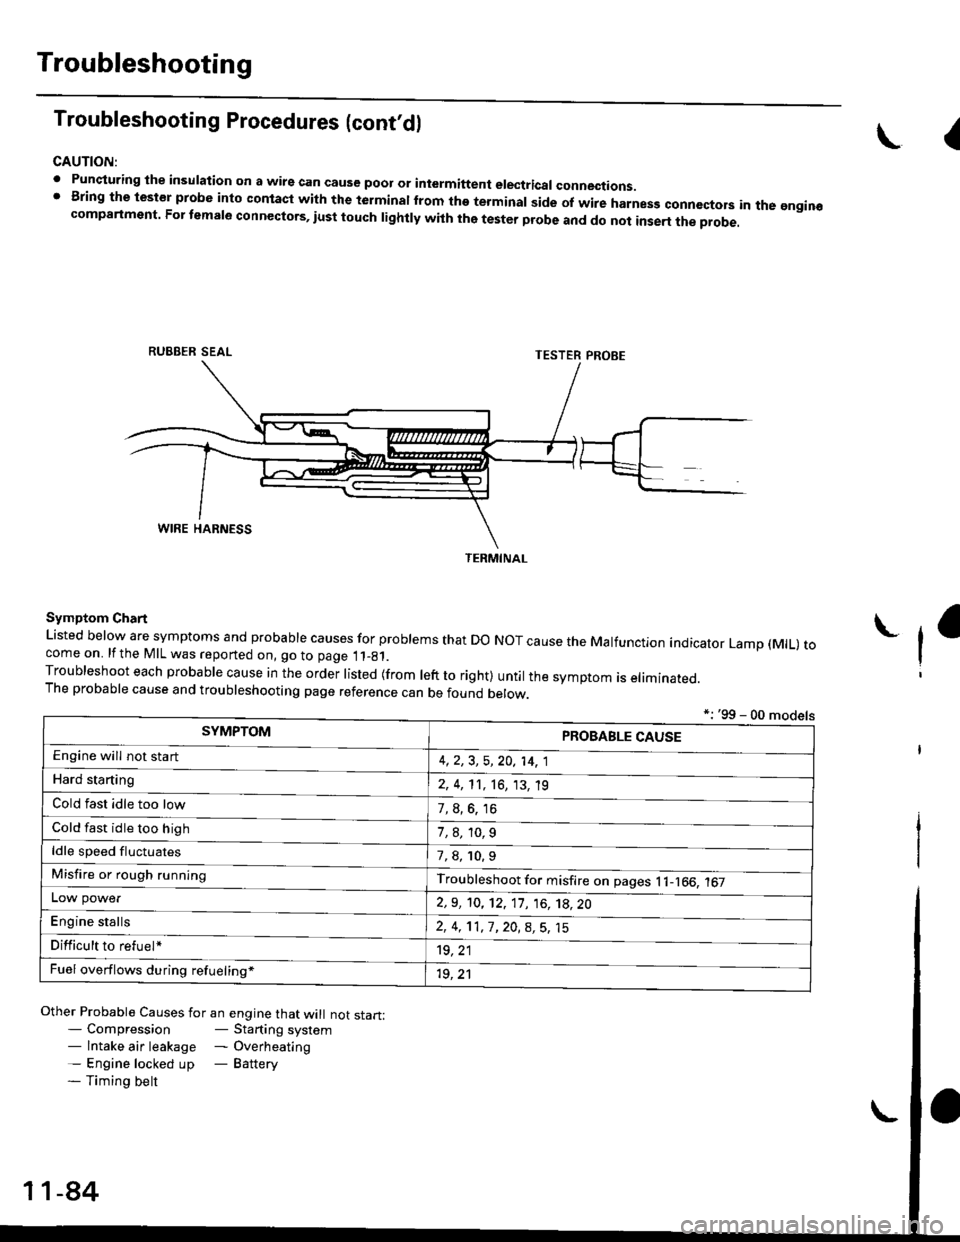 HONDA CIVIC 1997 6.G Workshop Manual Troubleshooting
Troubleshooting Procedures (cont,dl
CAUTION:
. Punqturing ihe insulation on a wirs can cause poor or intermiftent electricar connections.I Bring the test€r probe into contacl with th